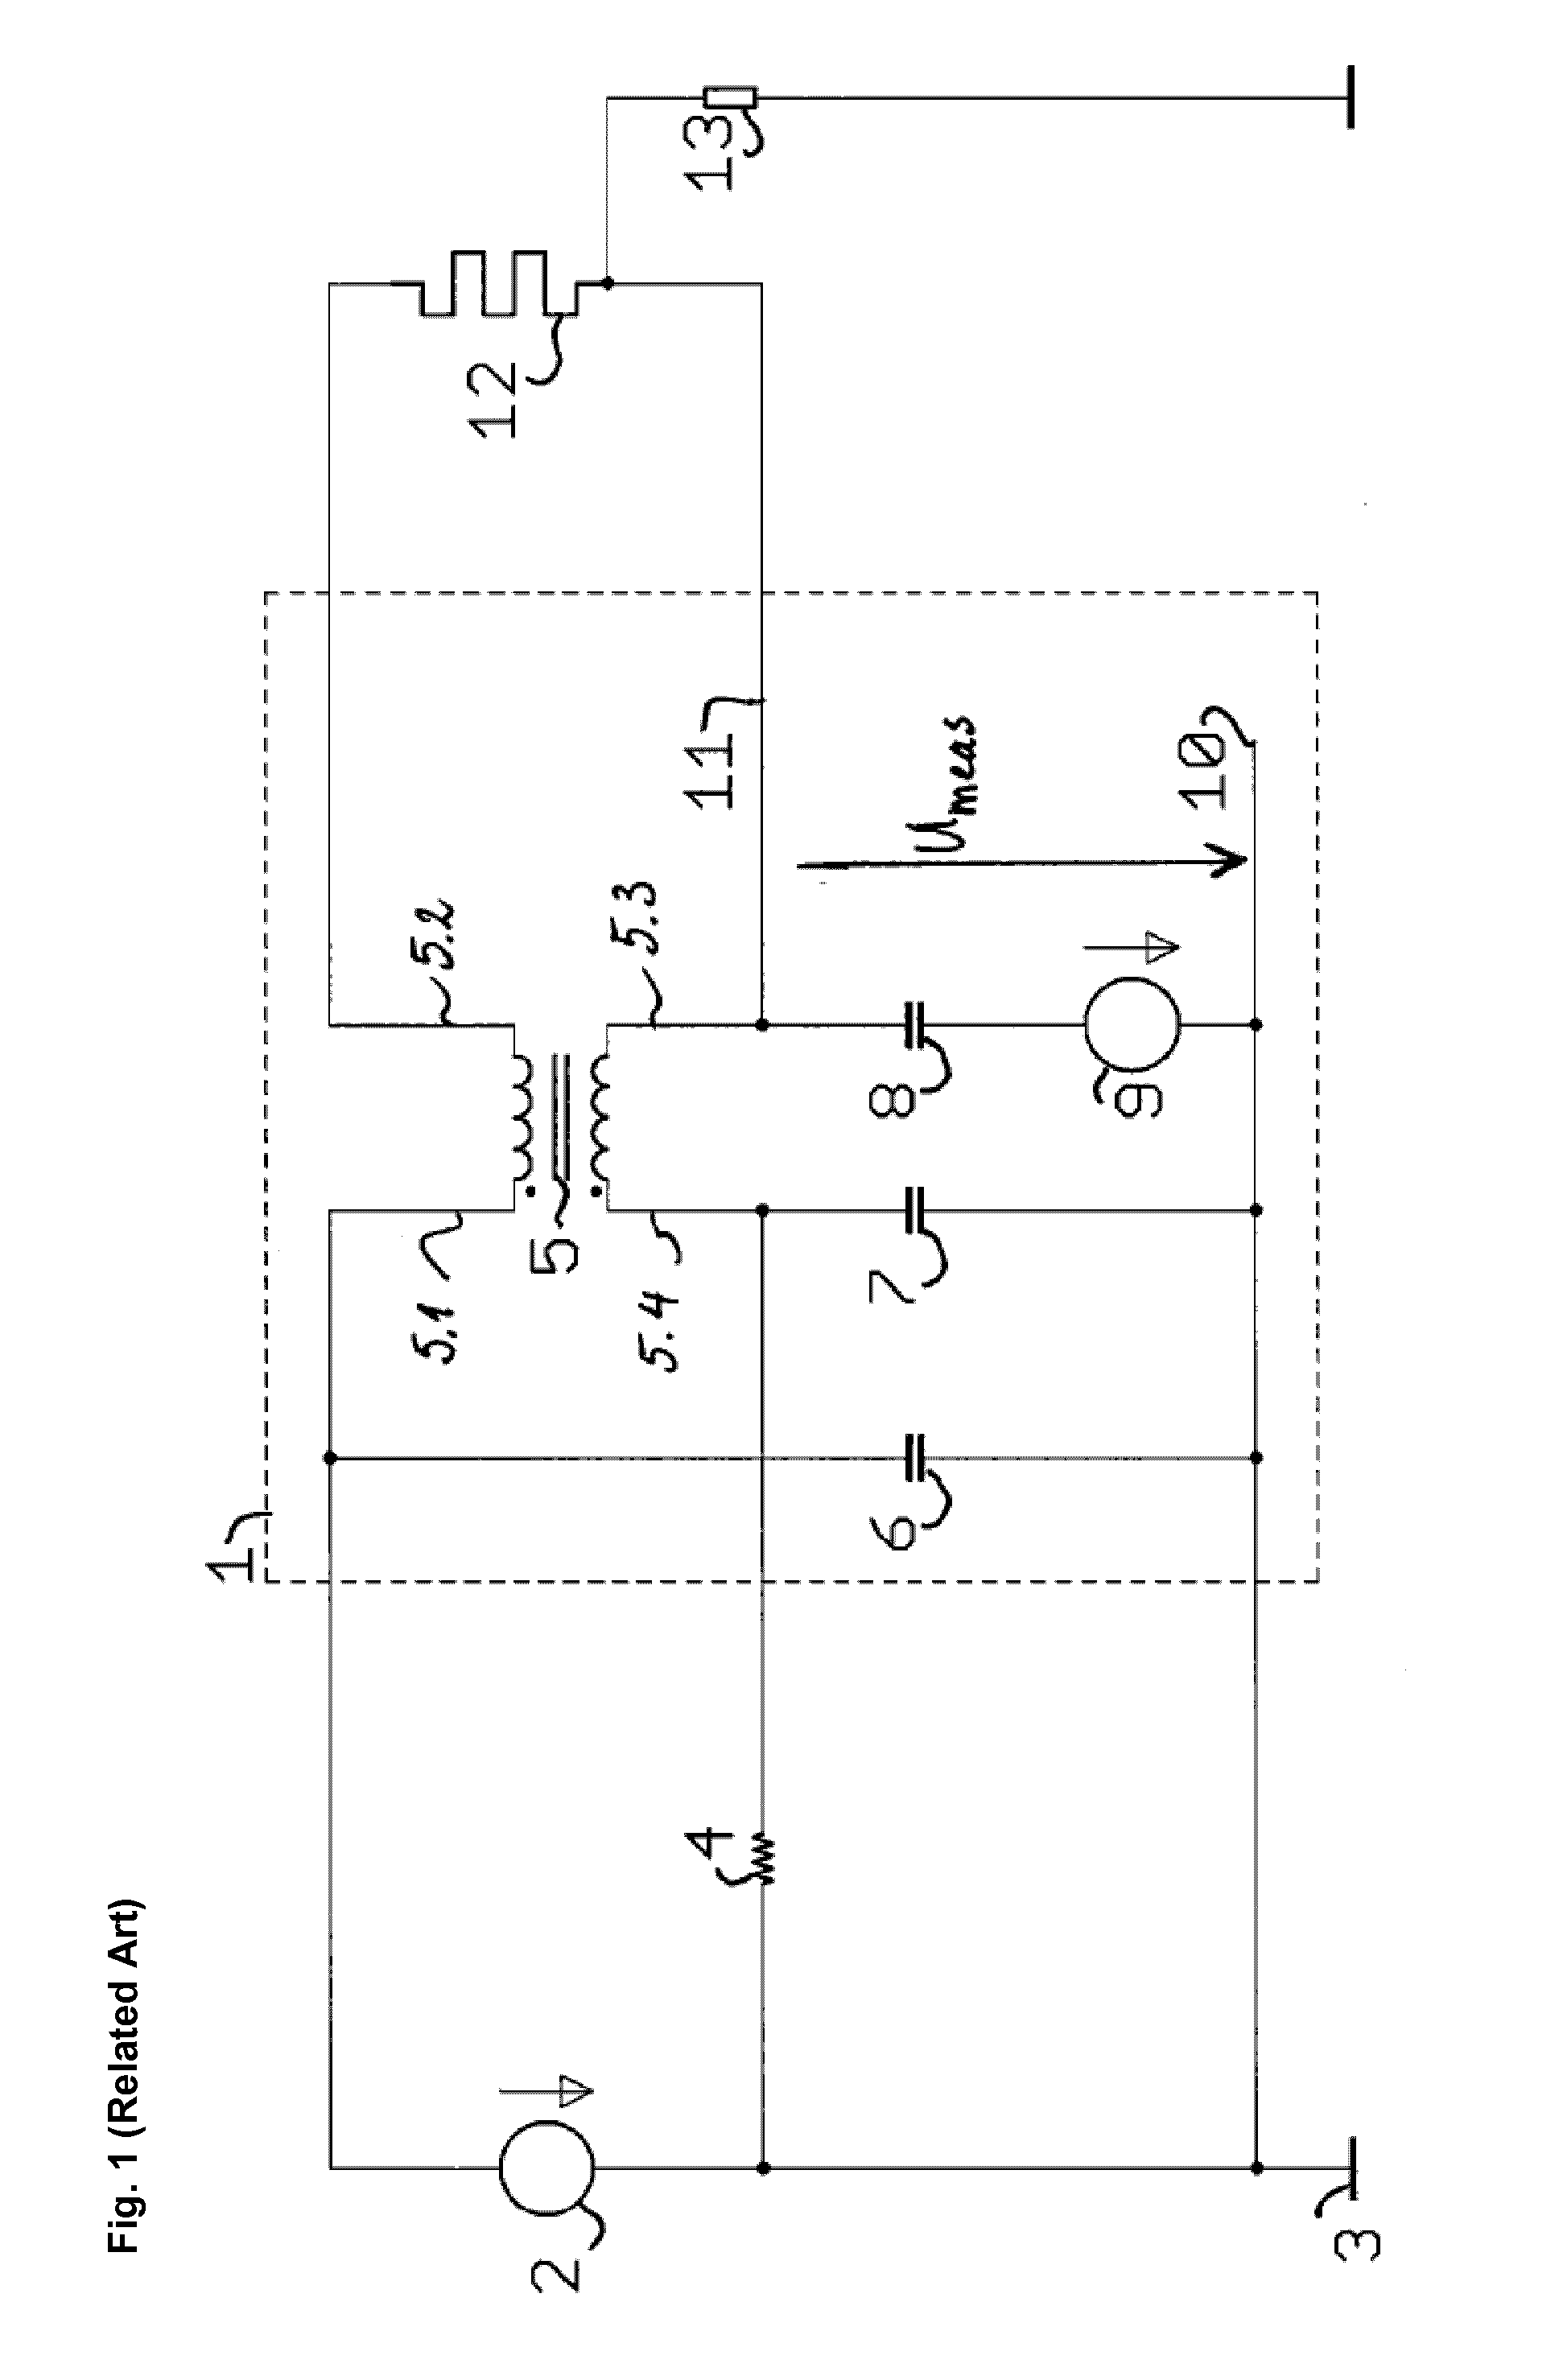 Capacitive sensor configured for using heating element as antenna electrode